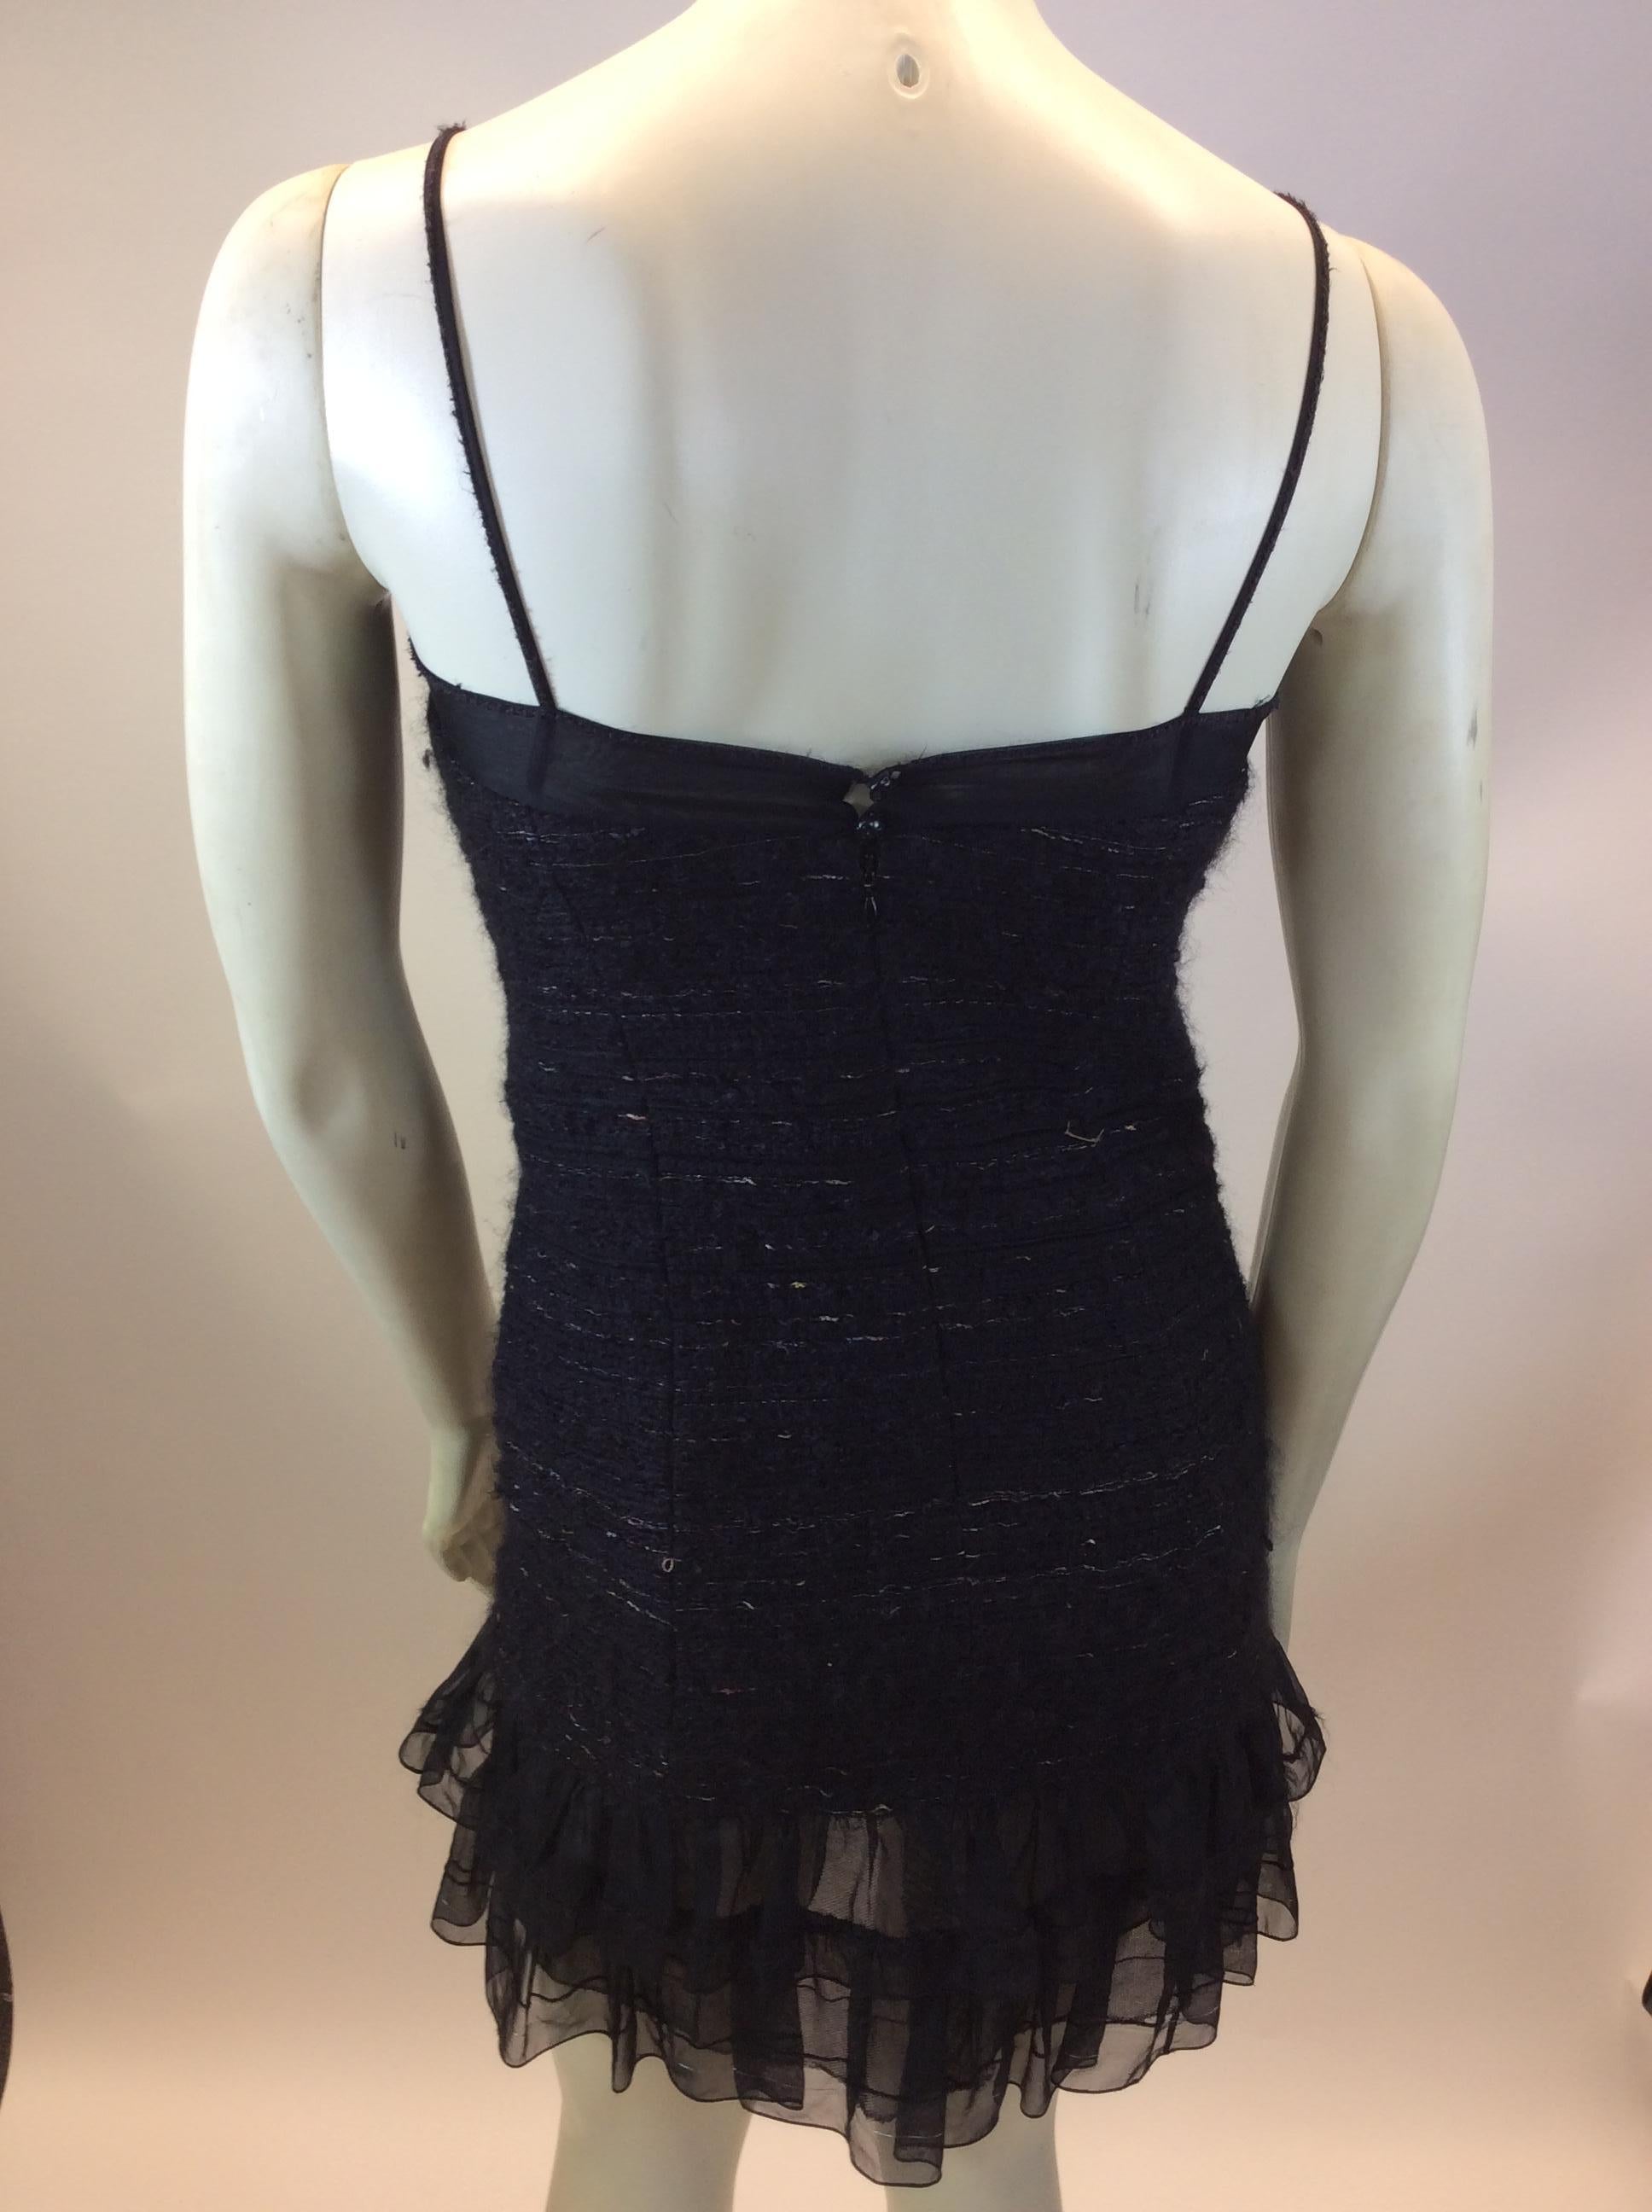 Chanel Black Wool Dress In Good Condition For Sale In Narberth, PA